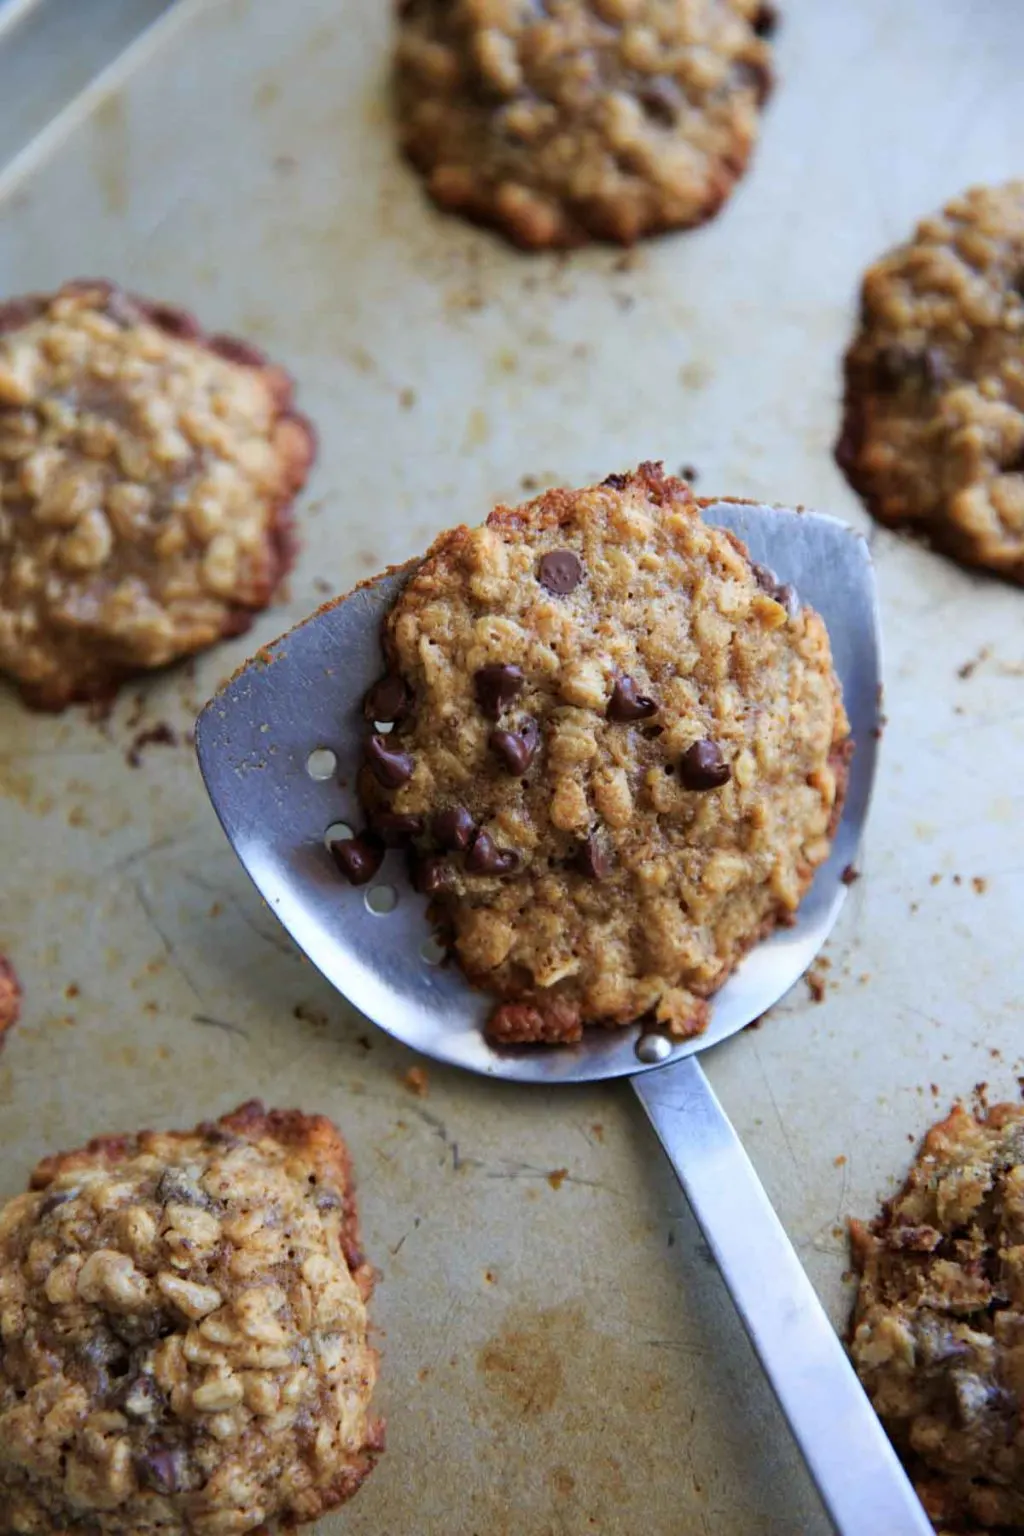 Lactation cookies with less oats show a more crisp and crunchy cookie.